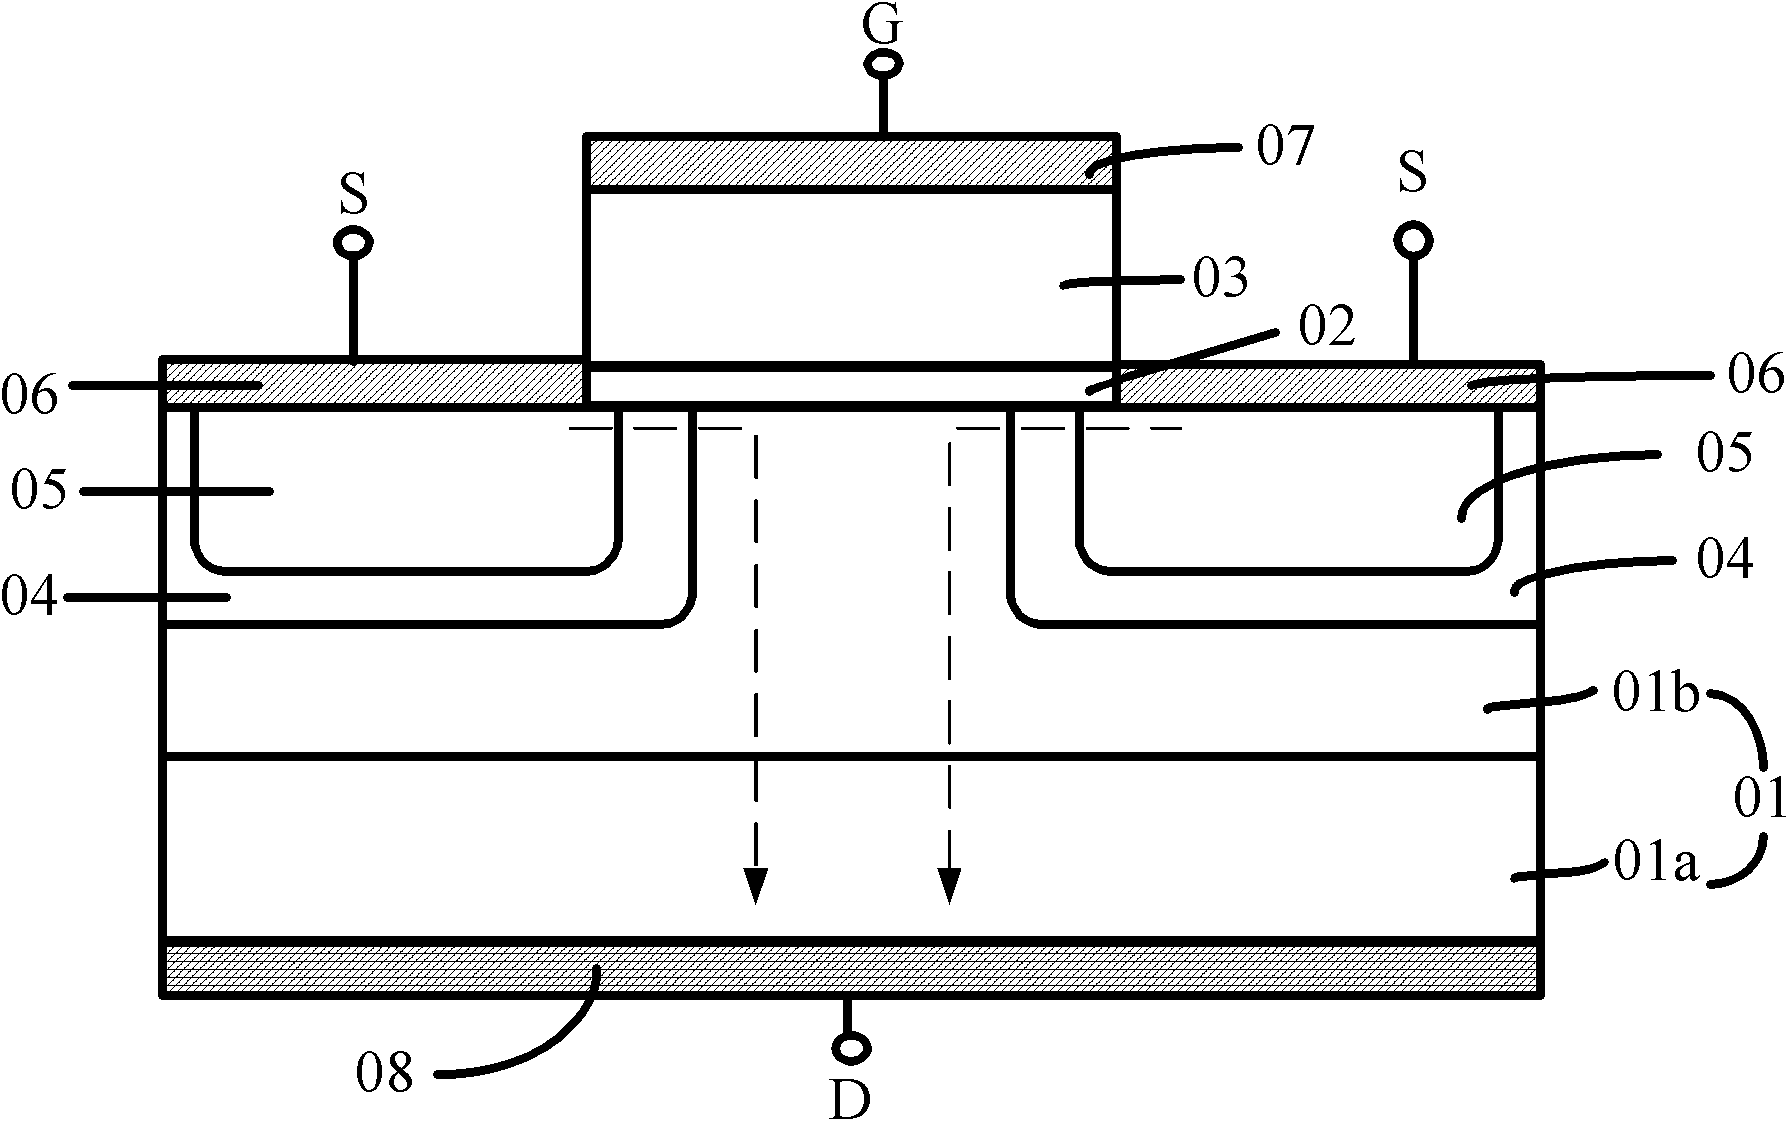 Formation method for VDMOS (vertical double-diffused metal oxide semiconductor) device